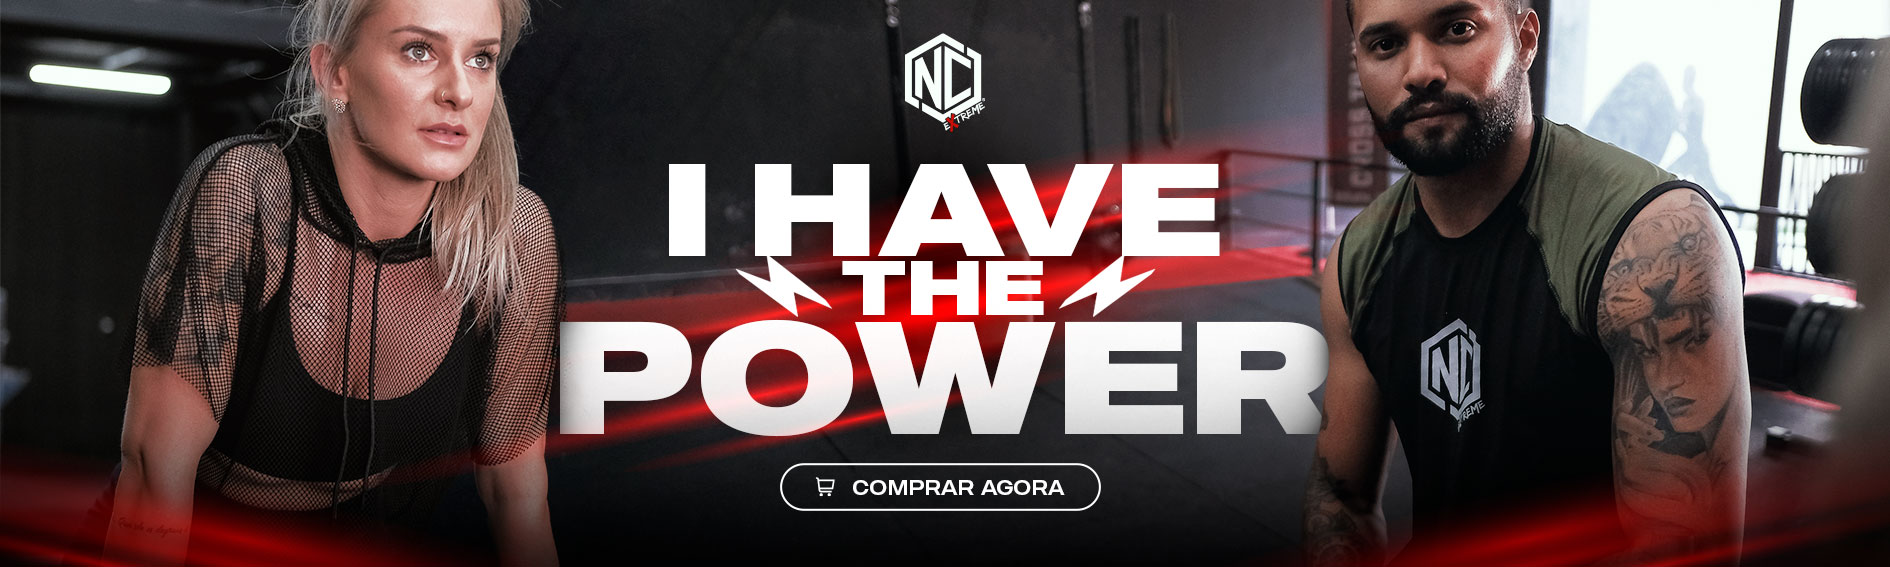 Banner I HAVE THE POWER